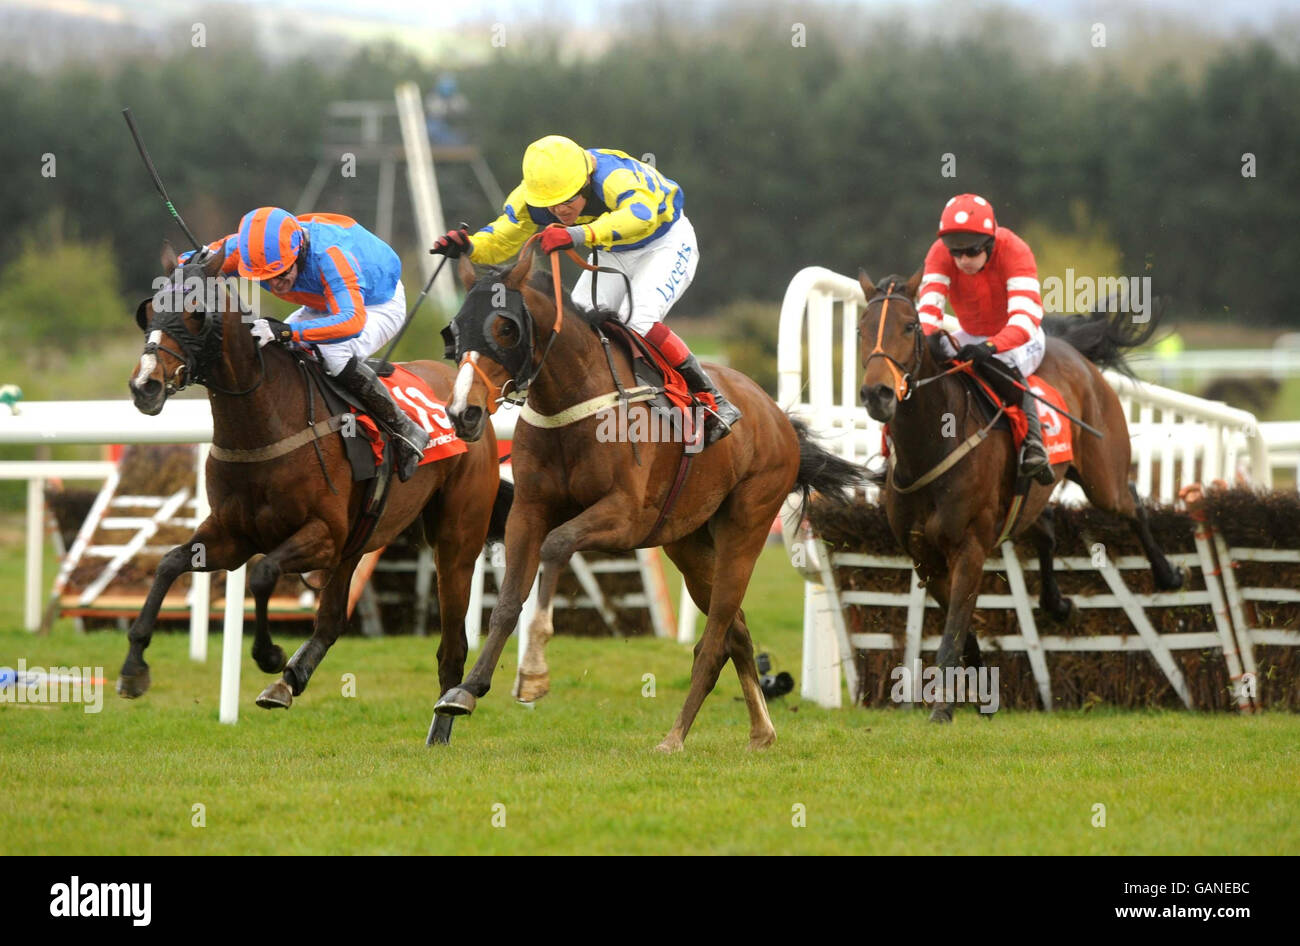 Robert Thornton on Blazing Bailey, (centre) trained by Alan King, wins the Ladbrokes.com World Series Hurdle during the 2008 National Hunt Festival at Punchestown Racecourse, Ireland. Stock Photo